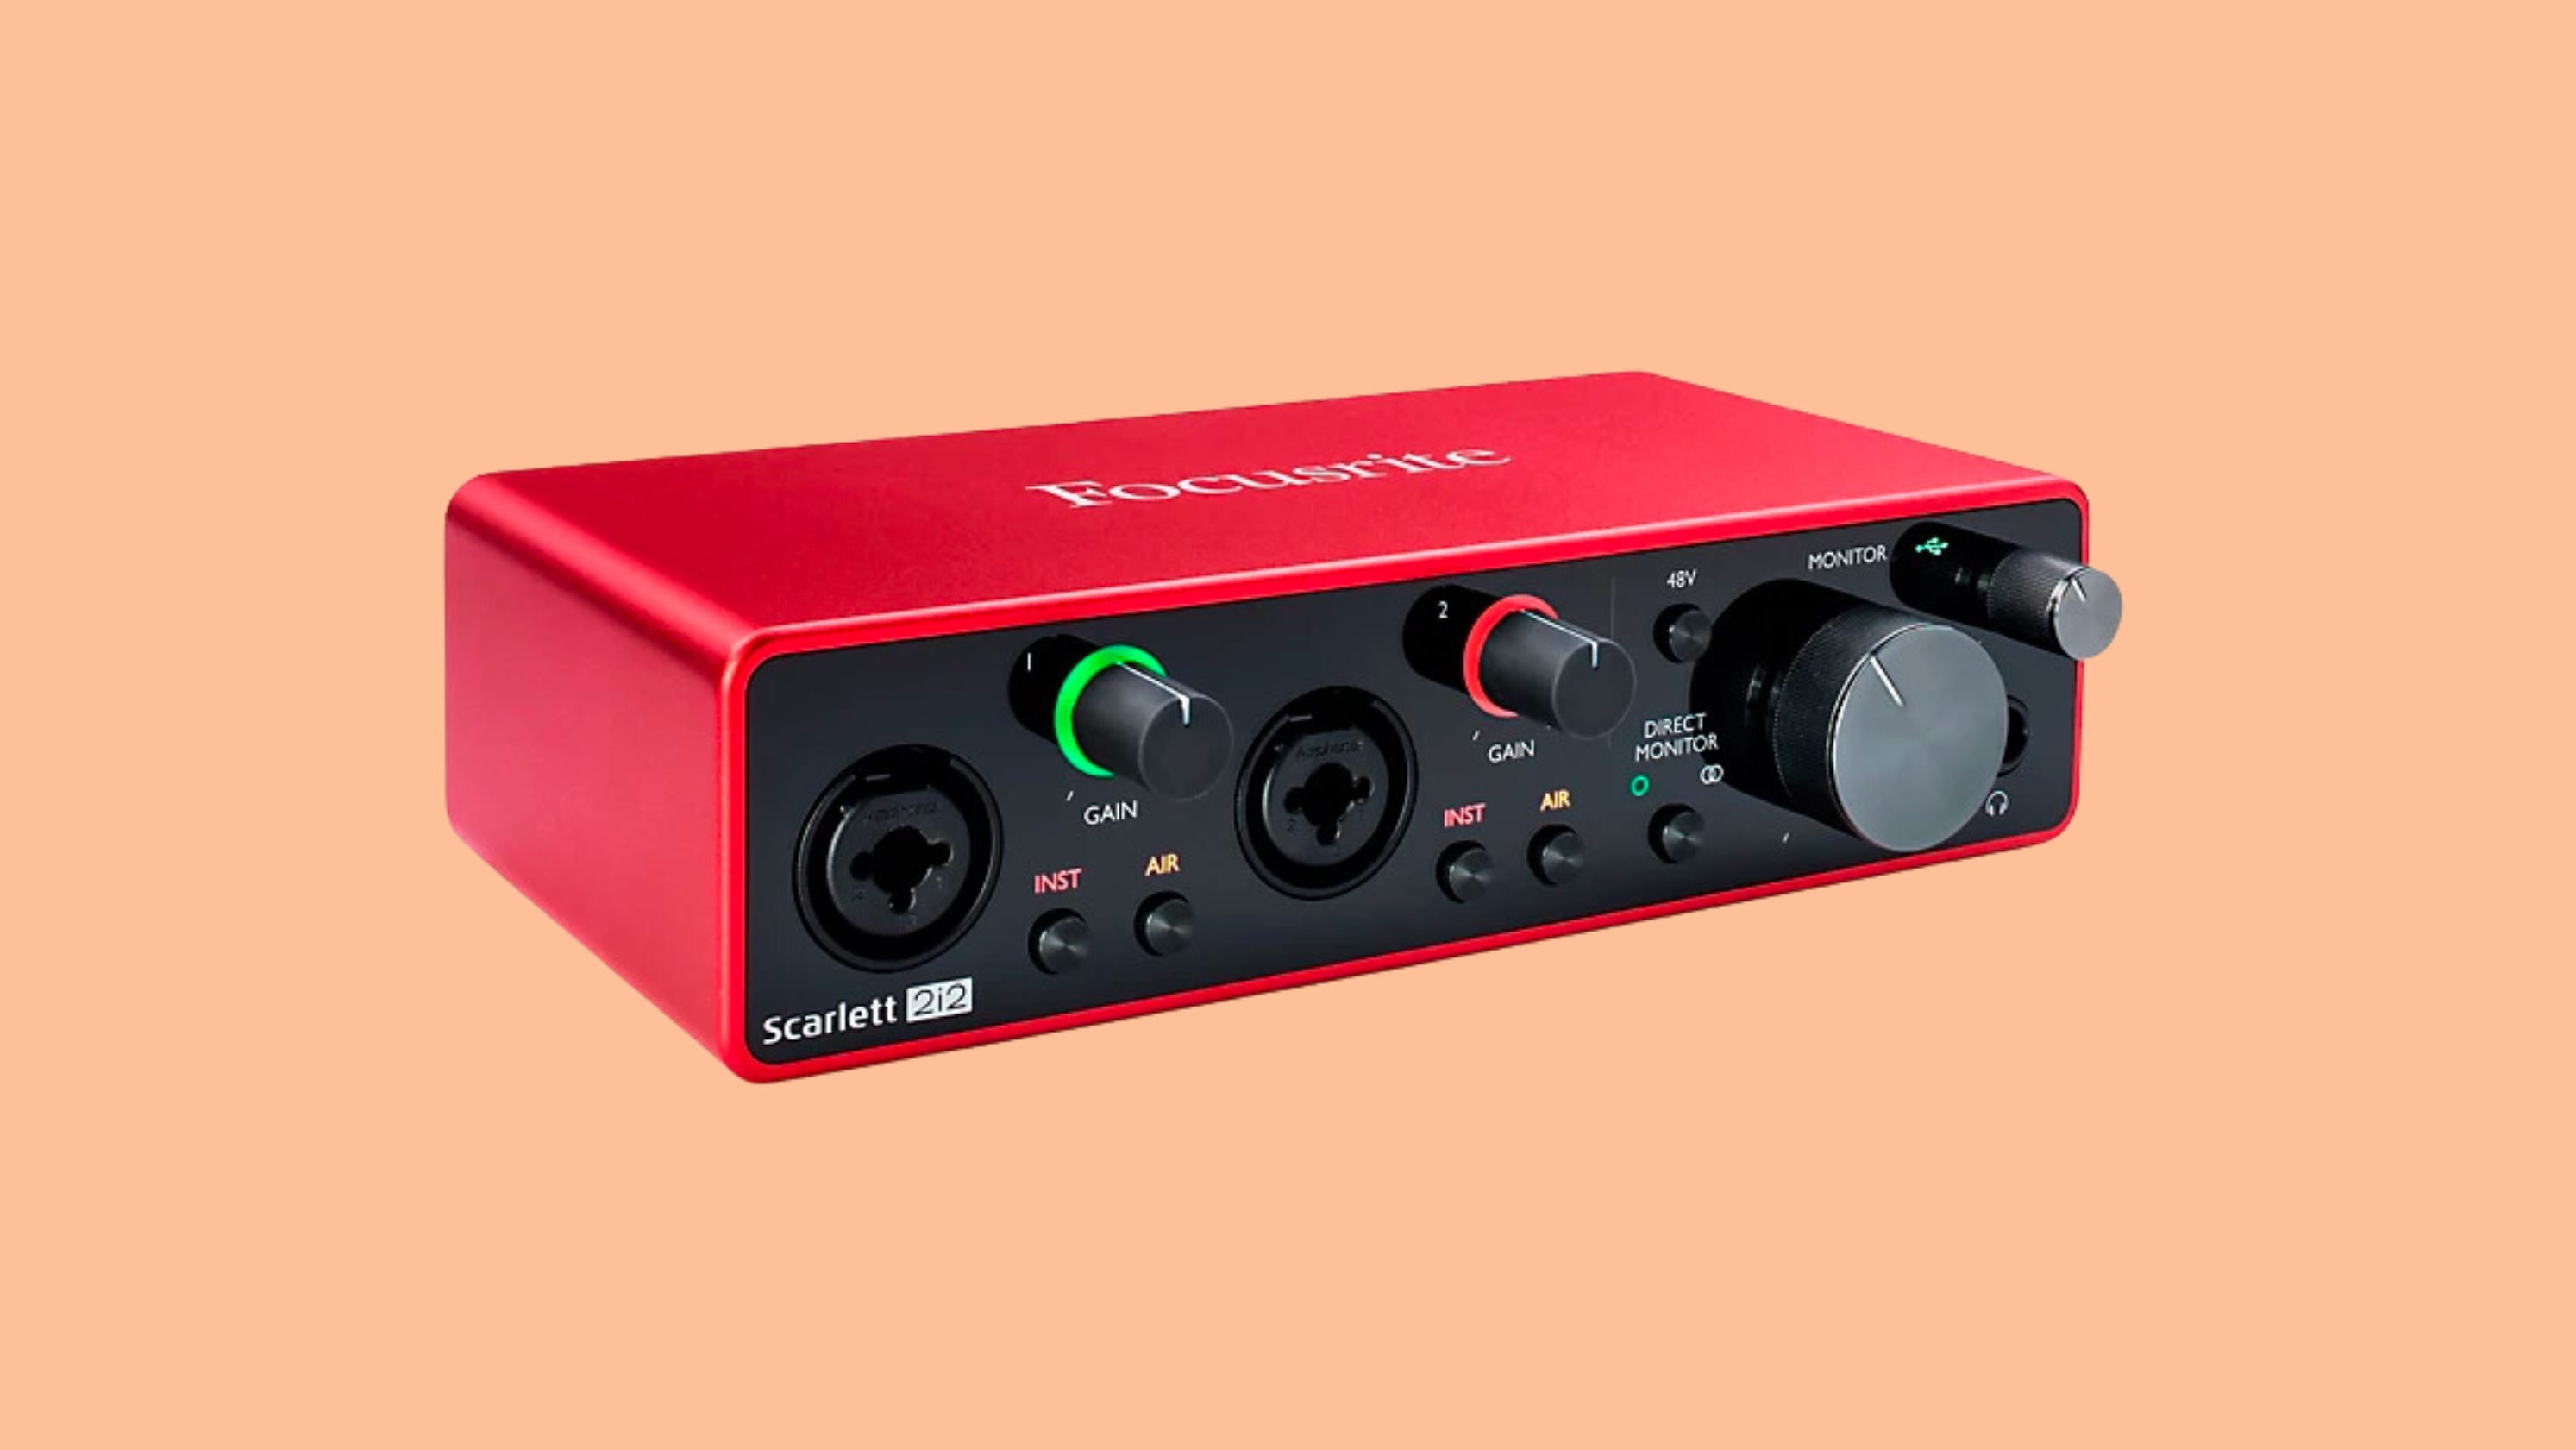 The Focusrite Scarlett 2i2 makes at-home music recording truly simple